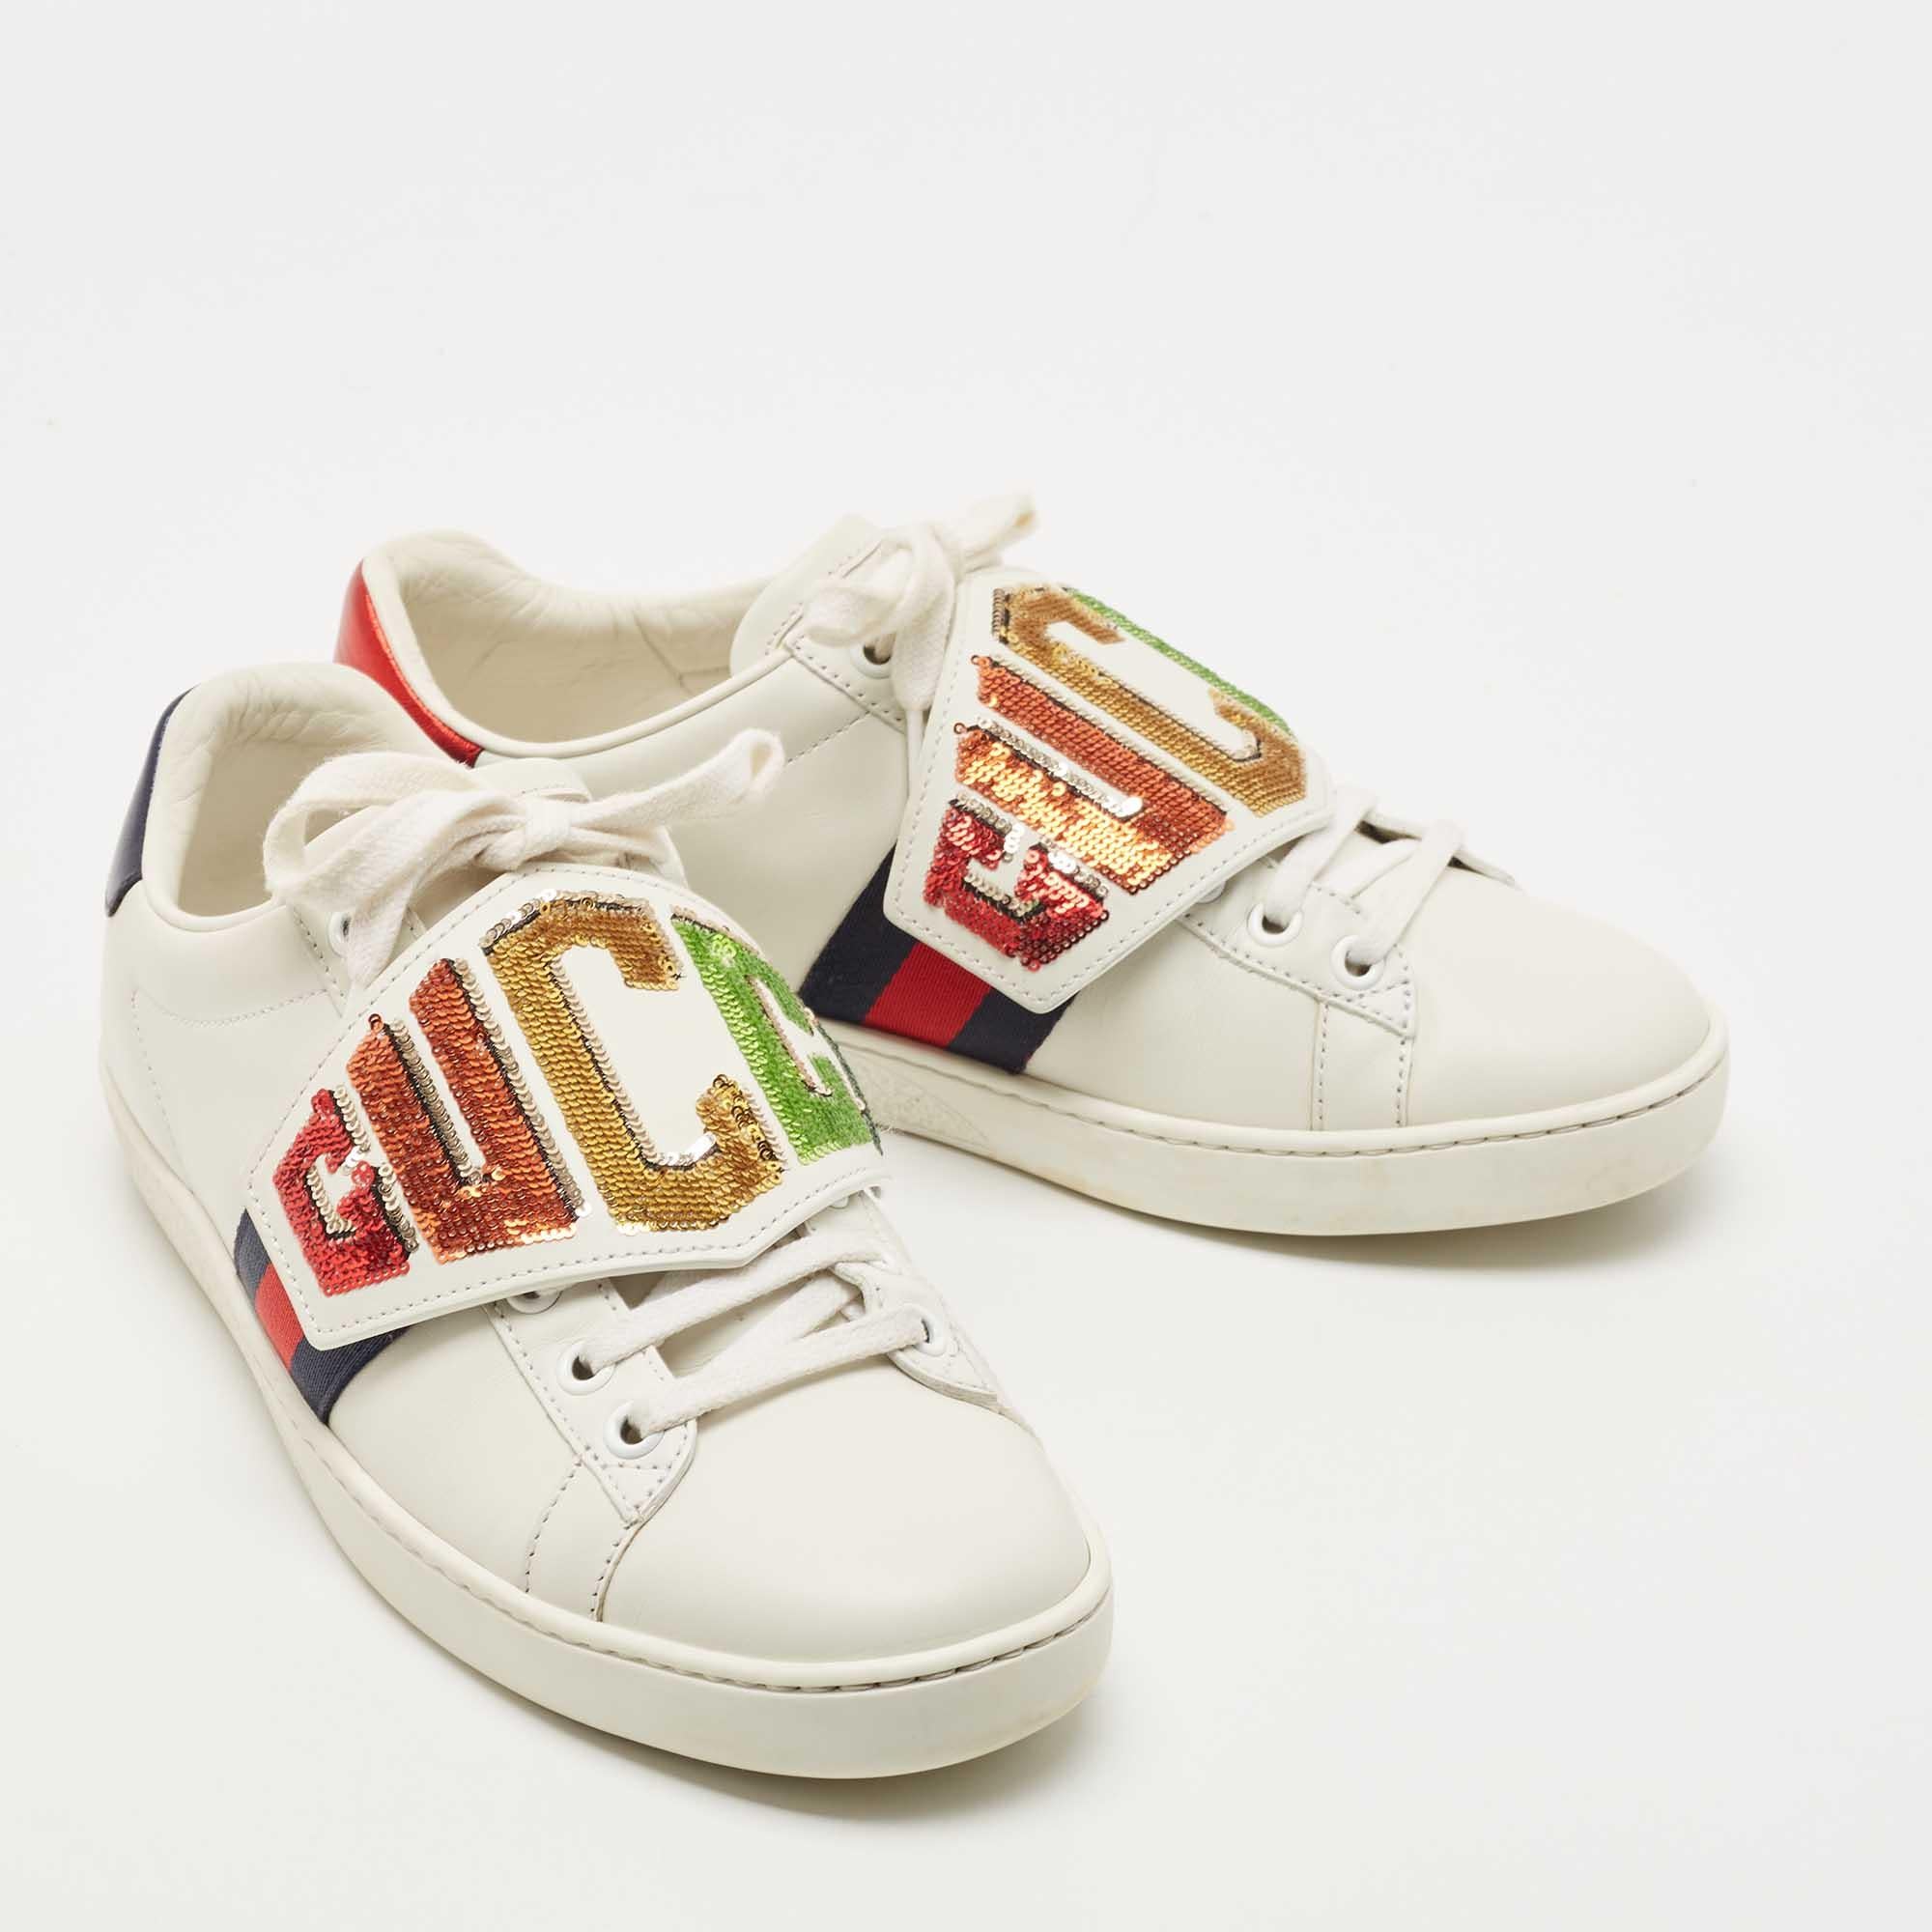 Gucci White Leather Sequin Embellished Ace Web Detail Low Top Sneakers Size 37 1